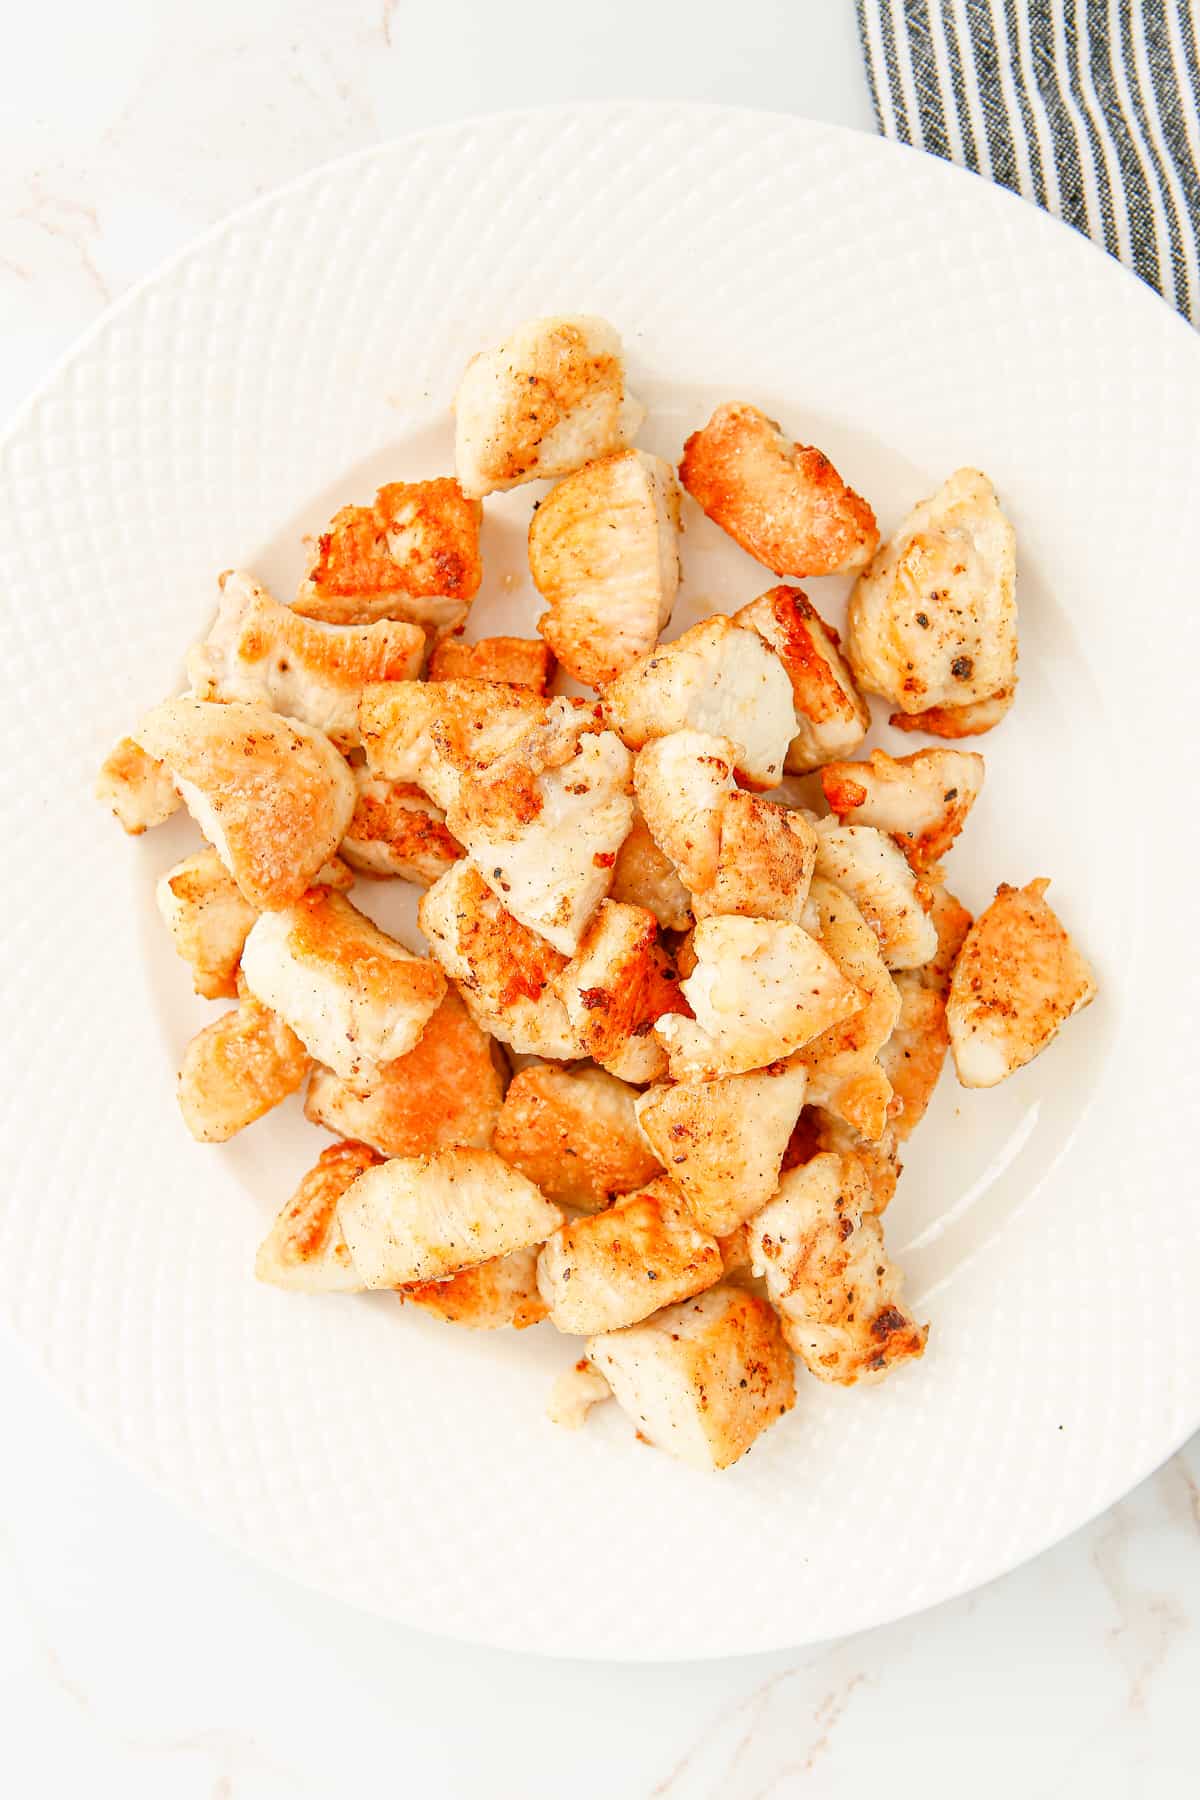 pan fried chicken pieces on plate